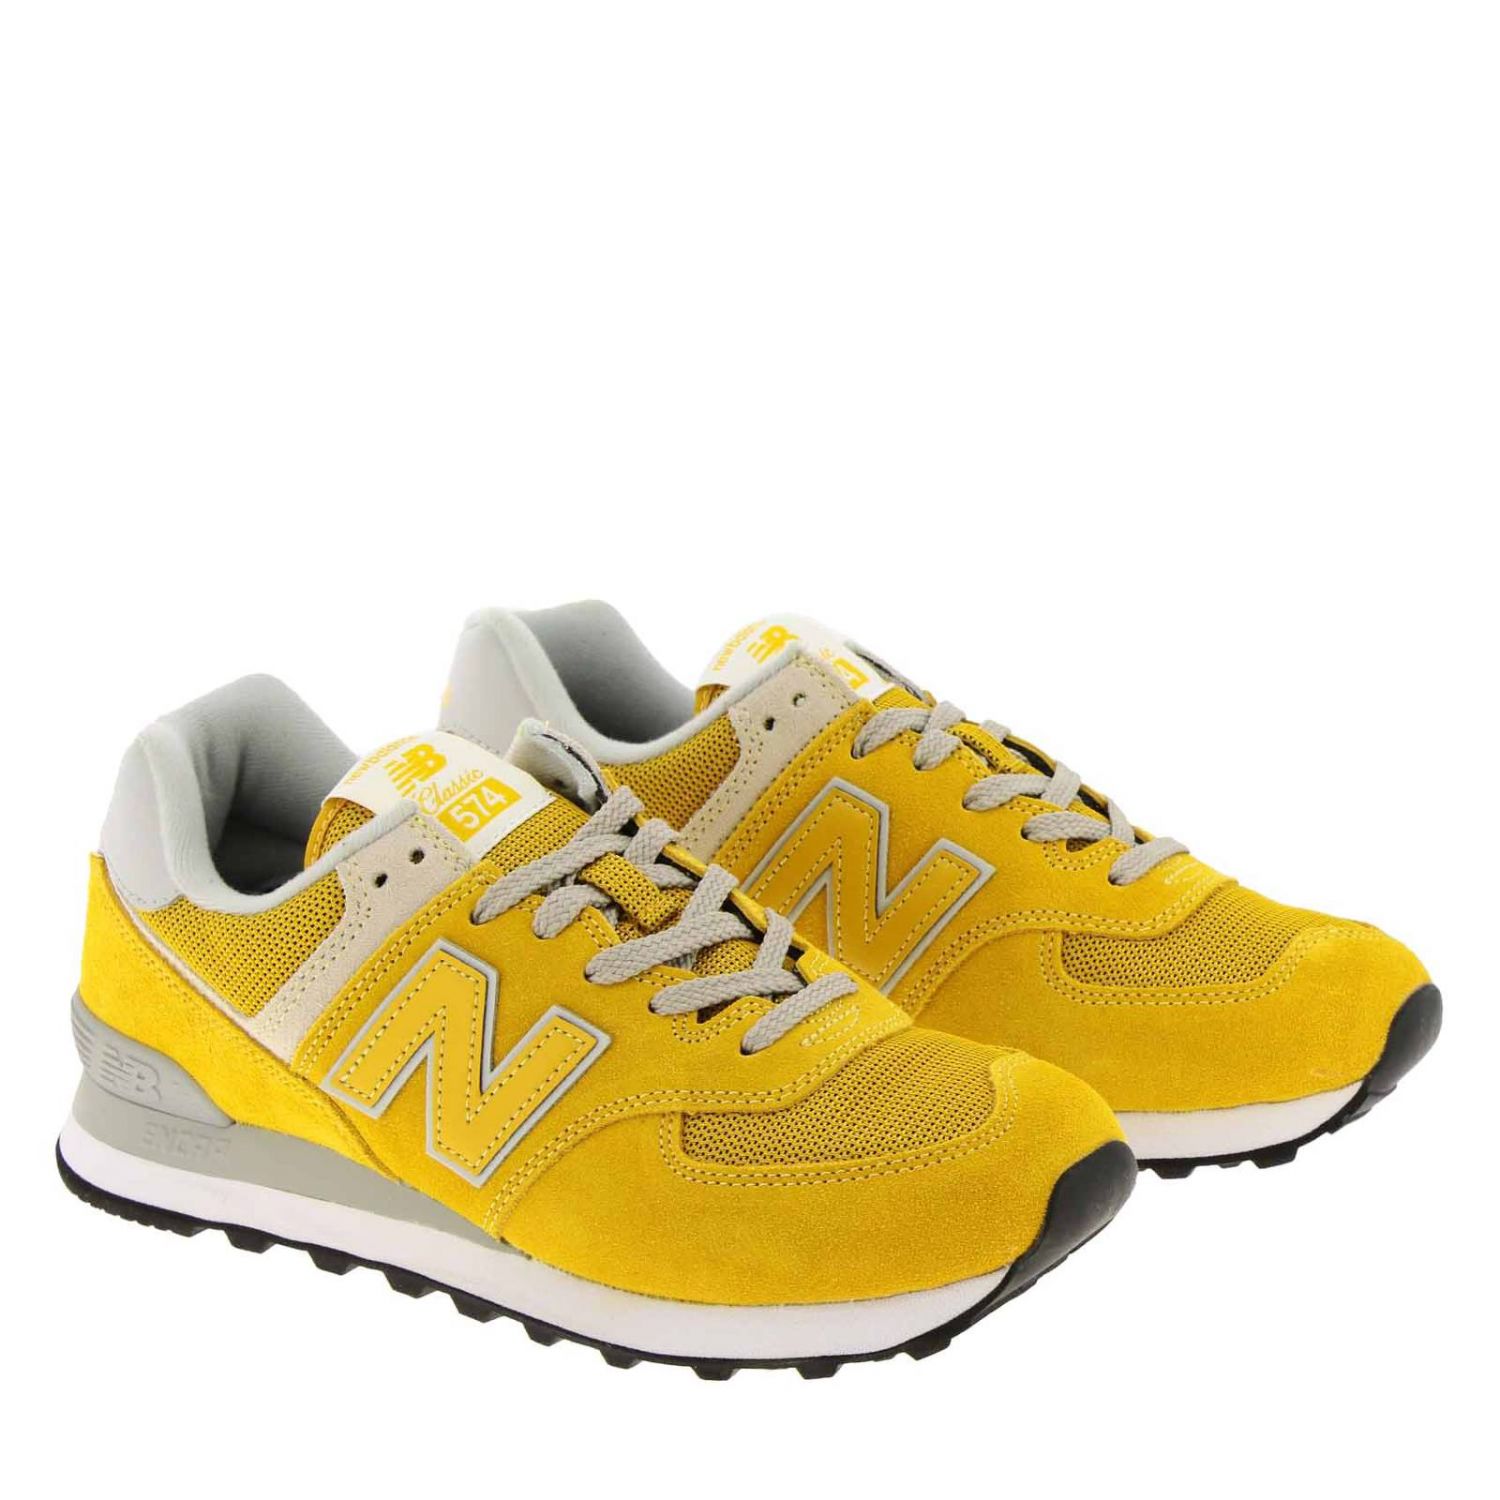 New Balance Outlet: sneakers for man - Yellow | New Balance sneakers ...